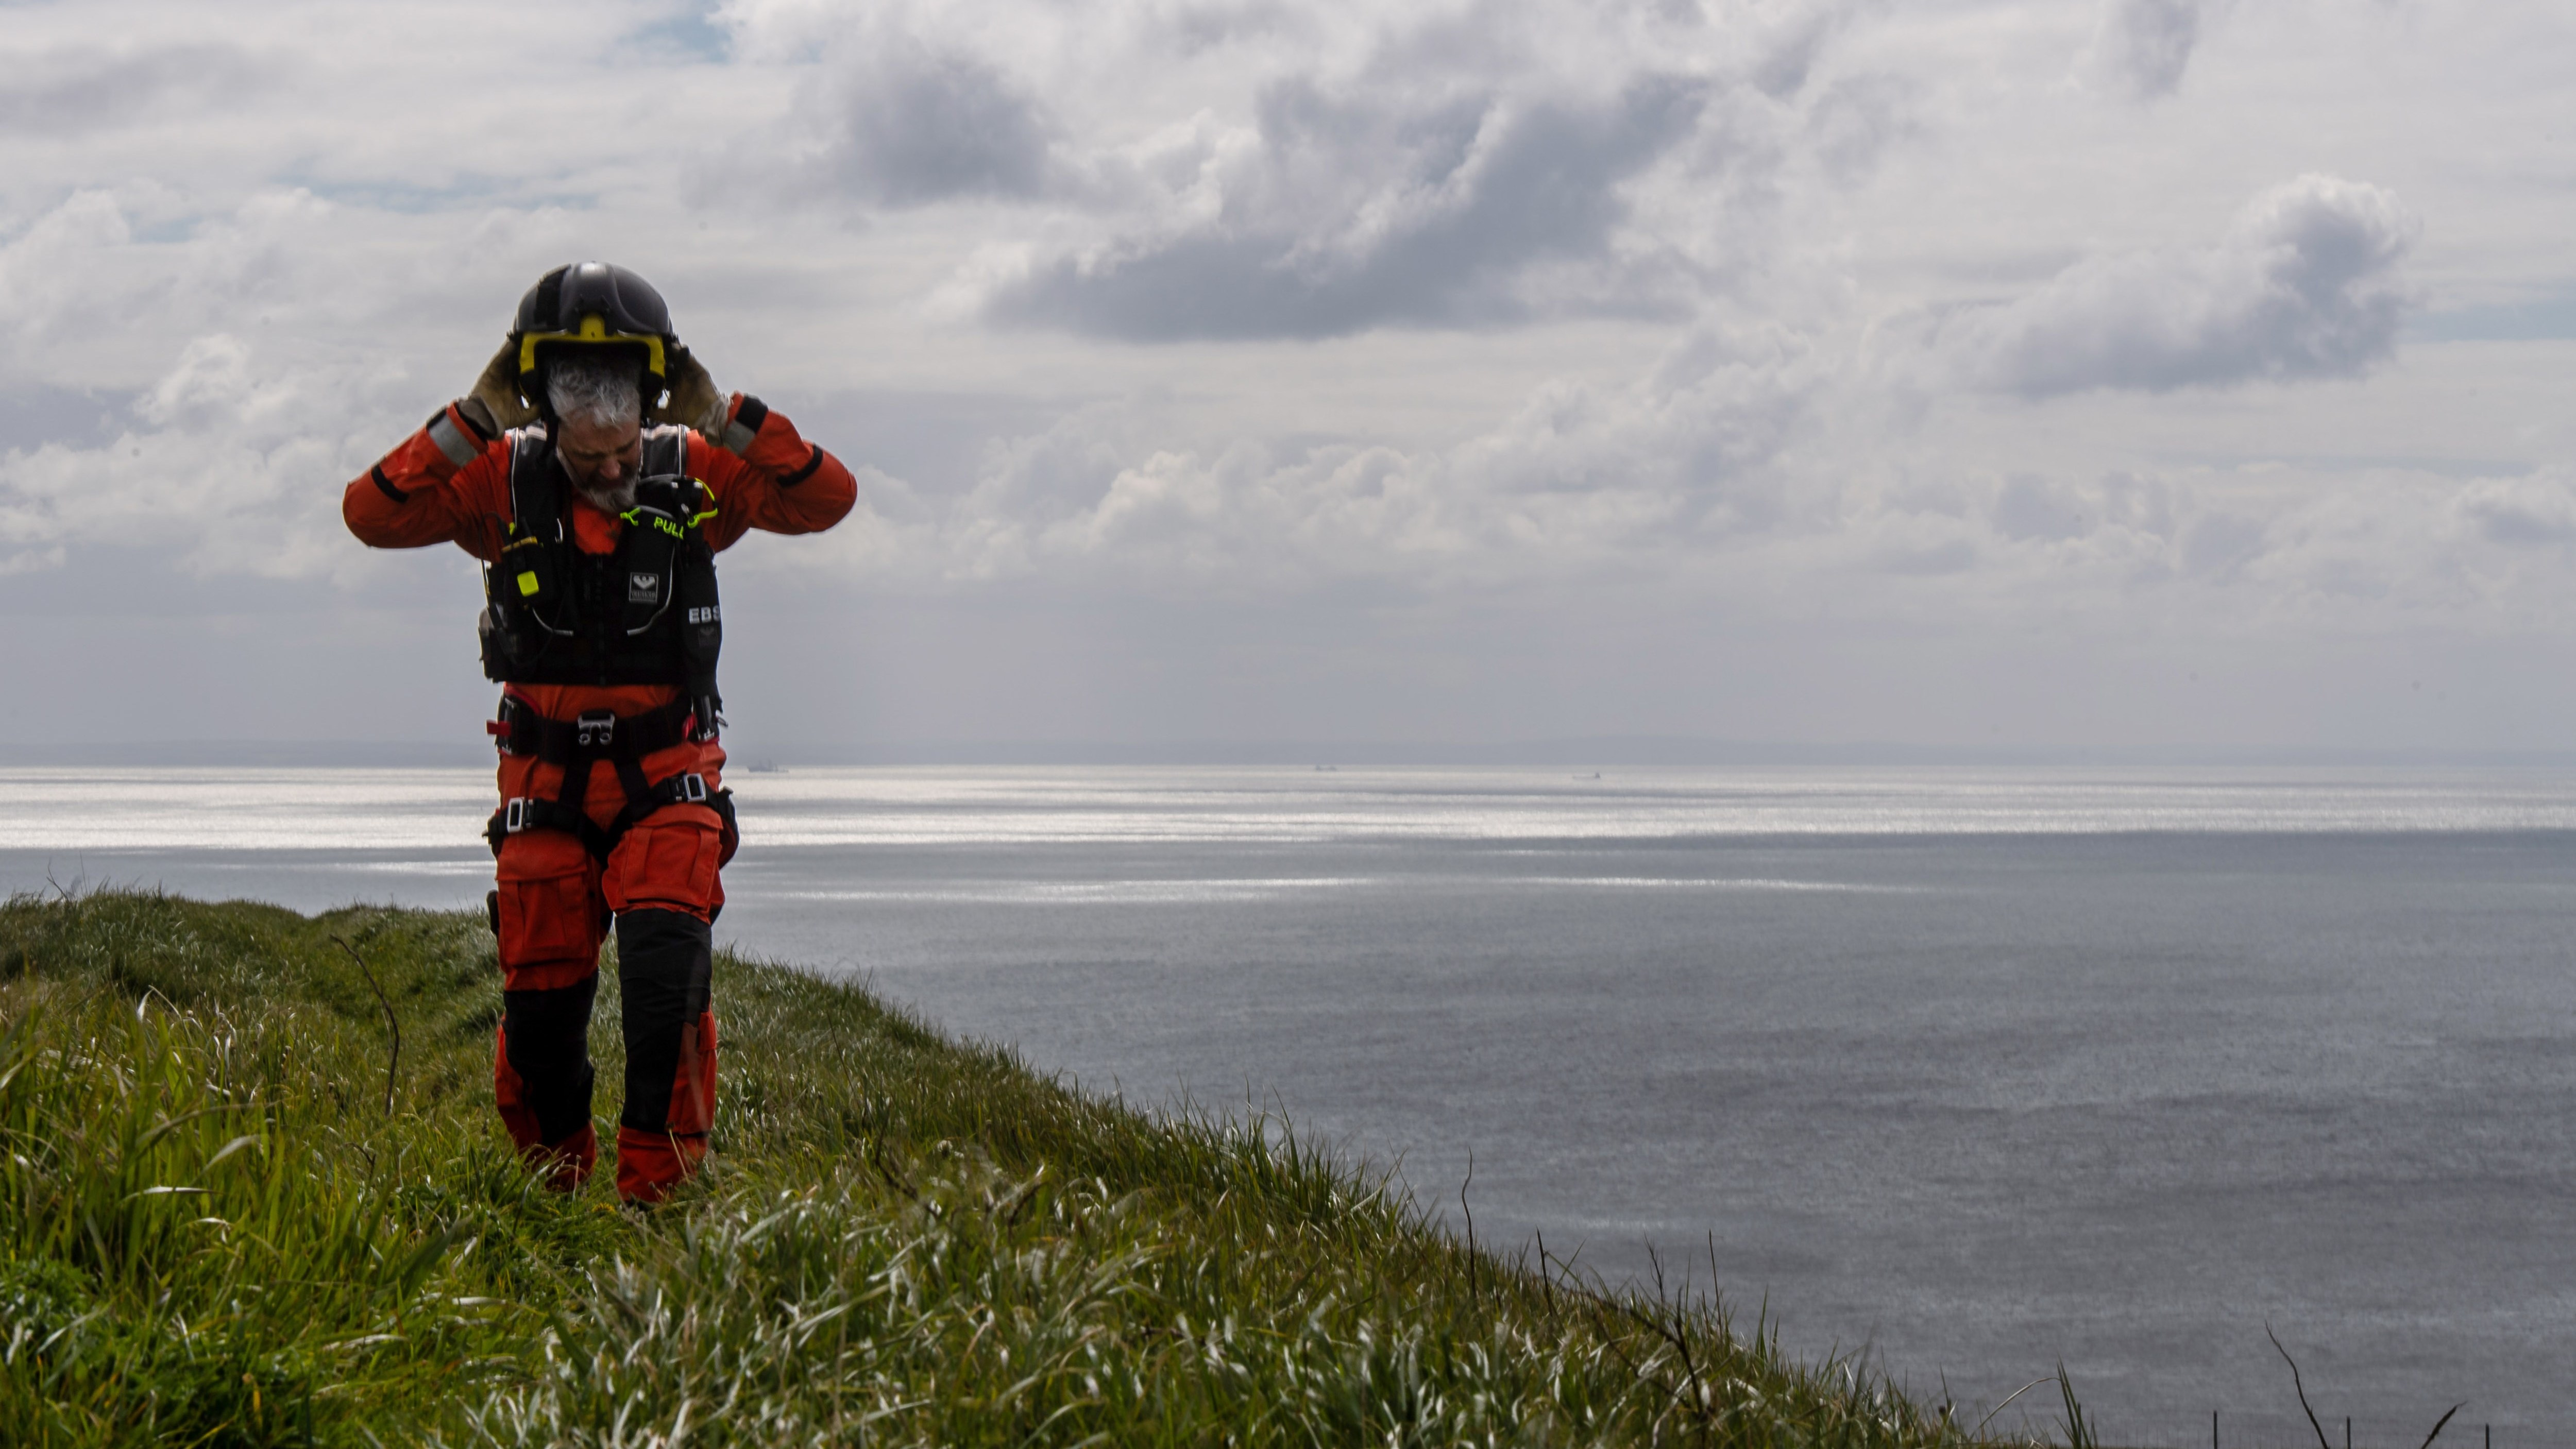 The British coastguard held a search and rescue training exercise in Dover on Wednesday, the day after five migrants died in the Channel